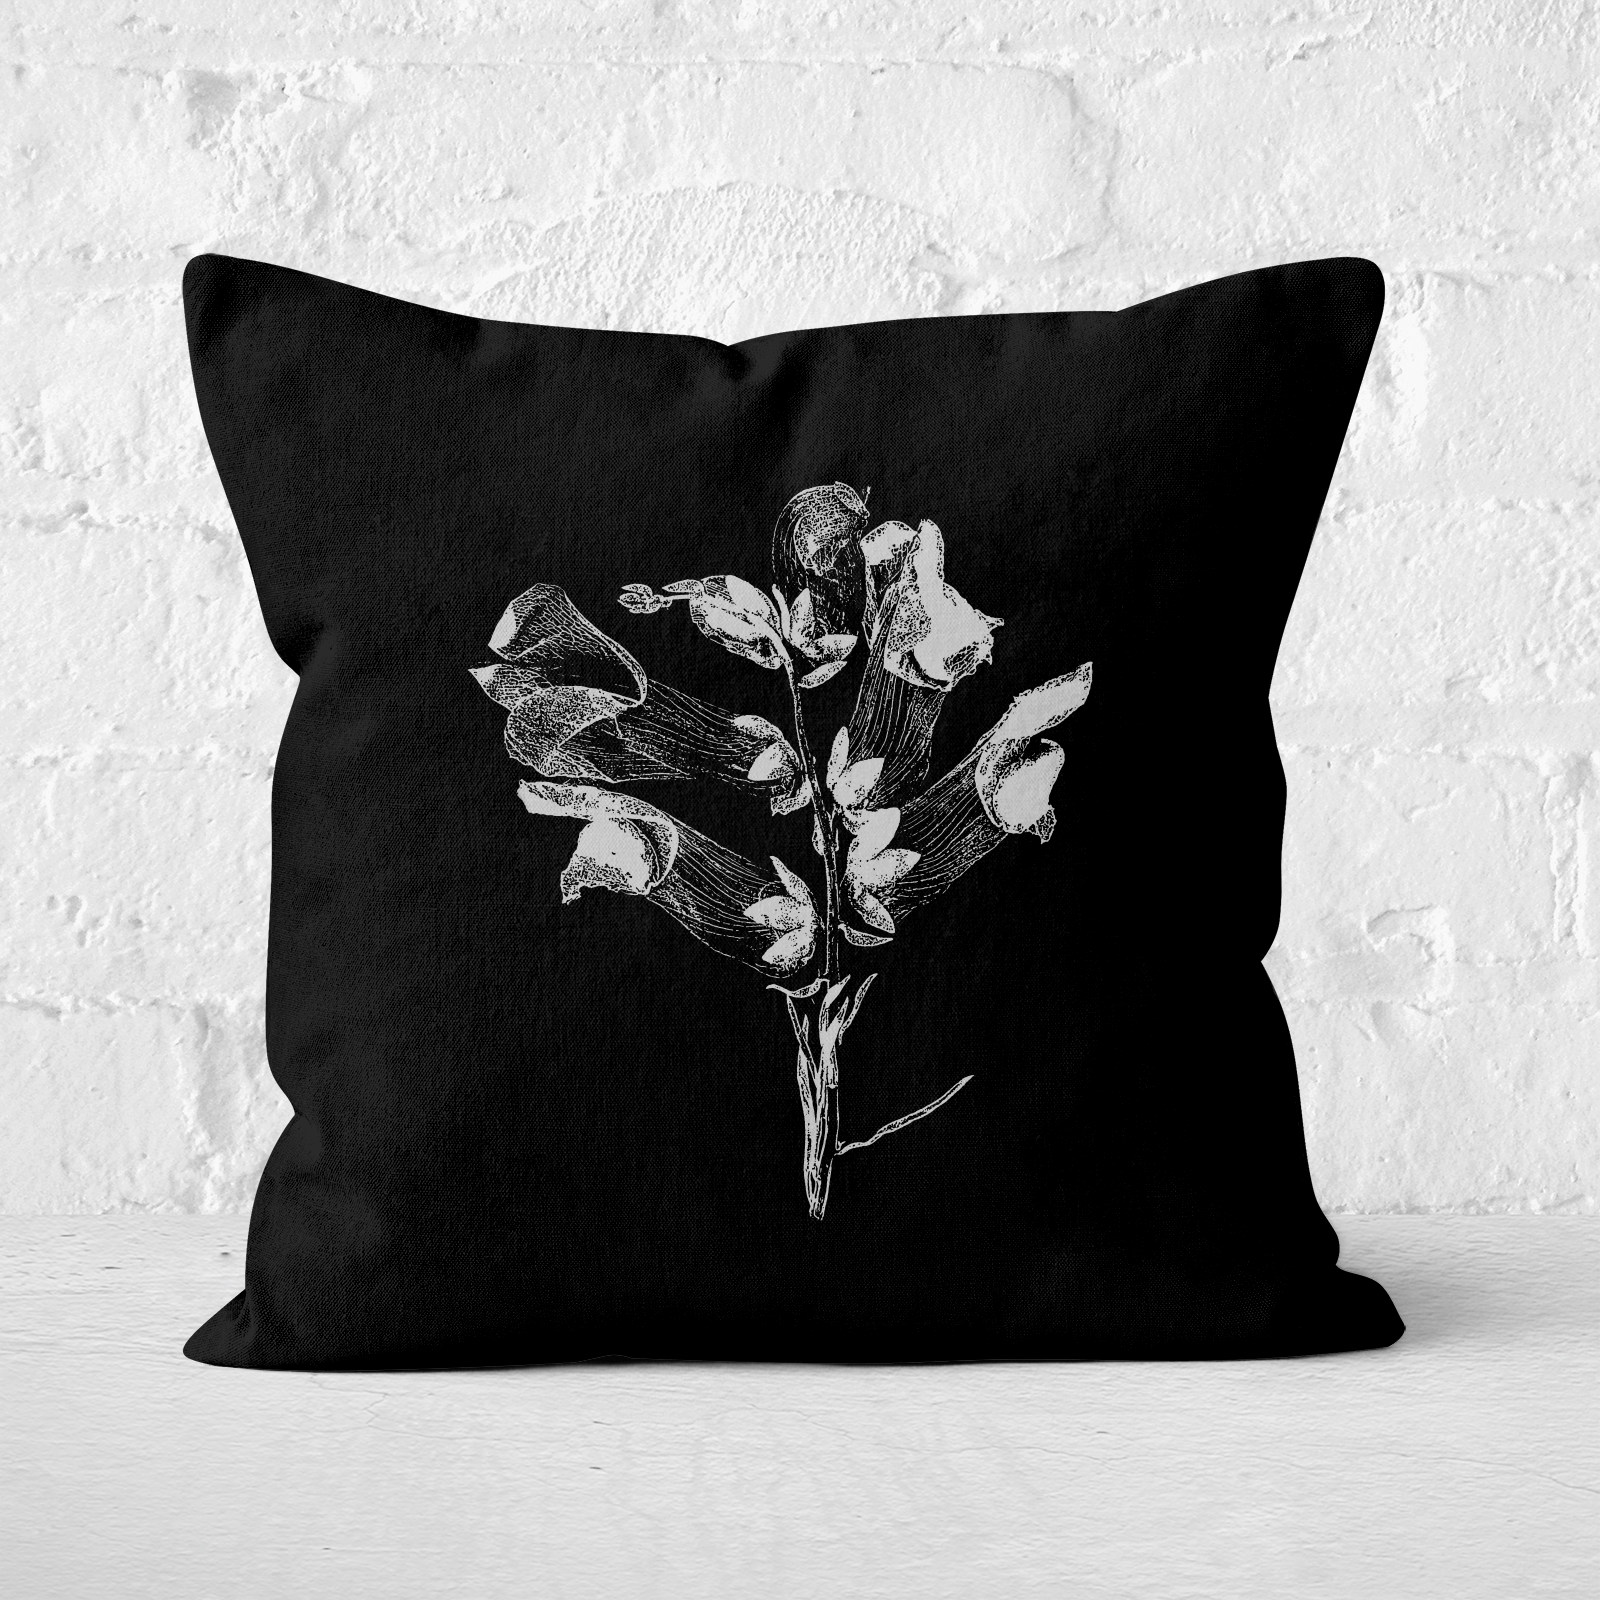 Pressed Flowers Monochrome Large Flower Square Cushion - 60x60cm - Soft Touch